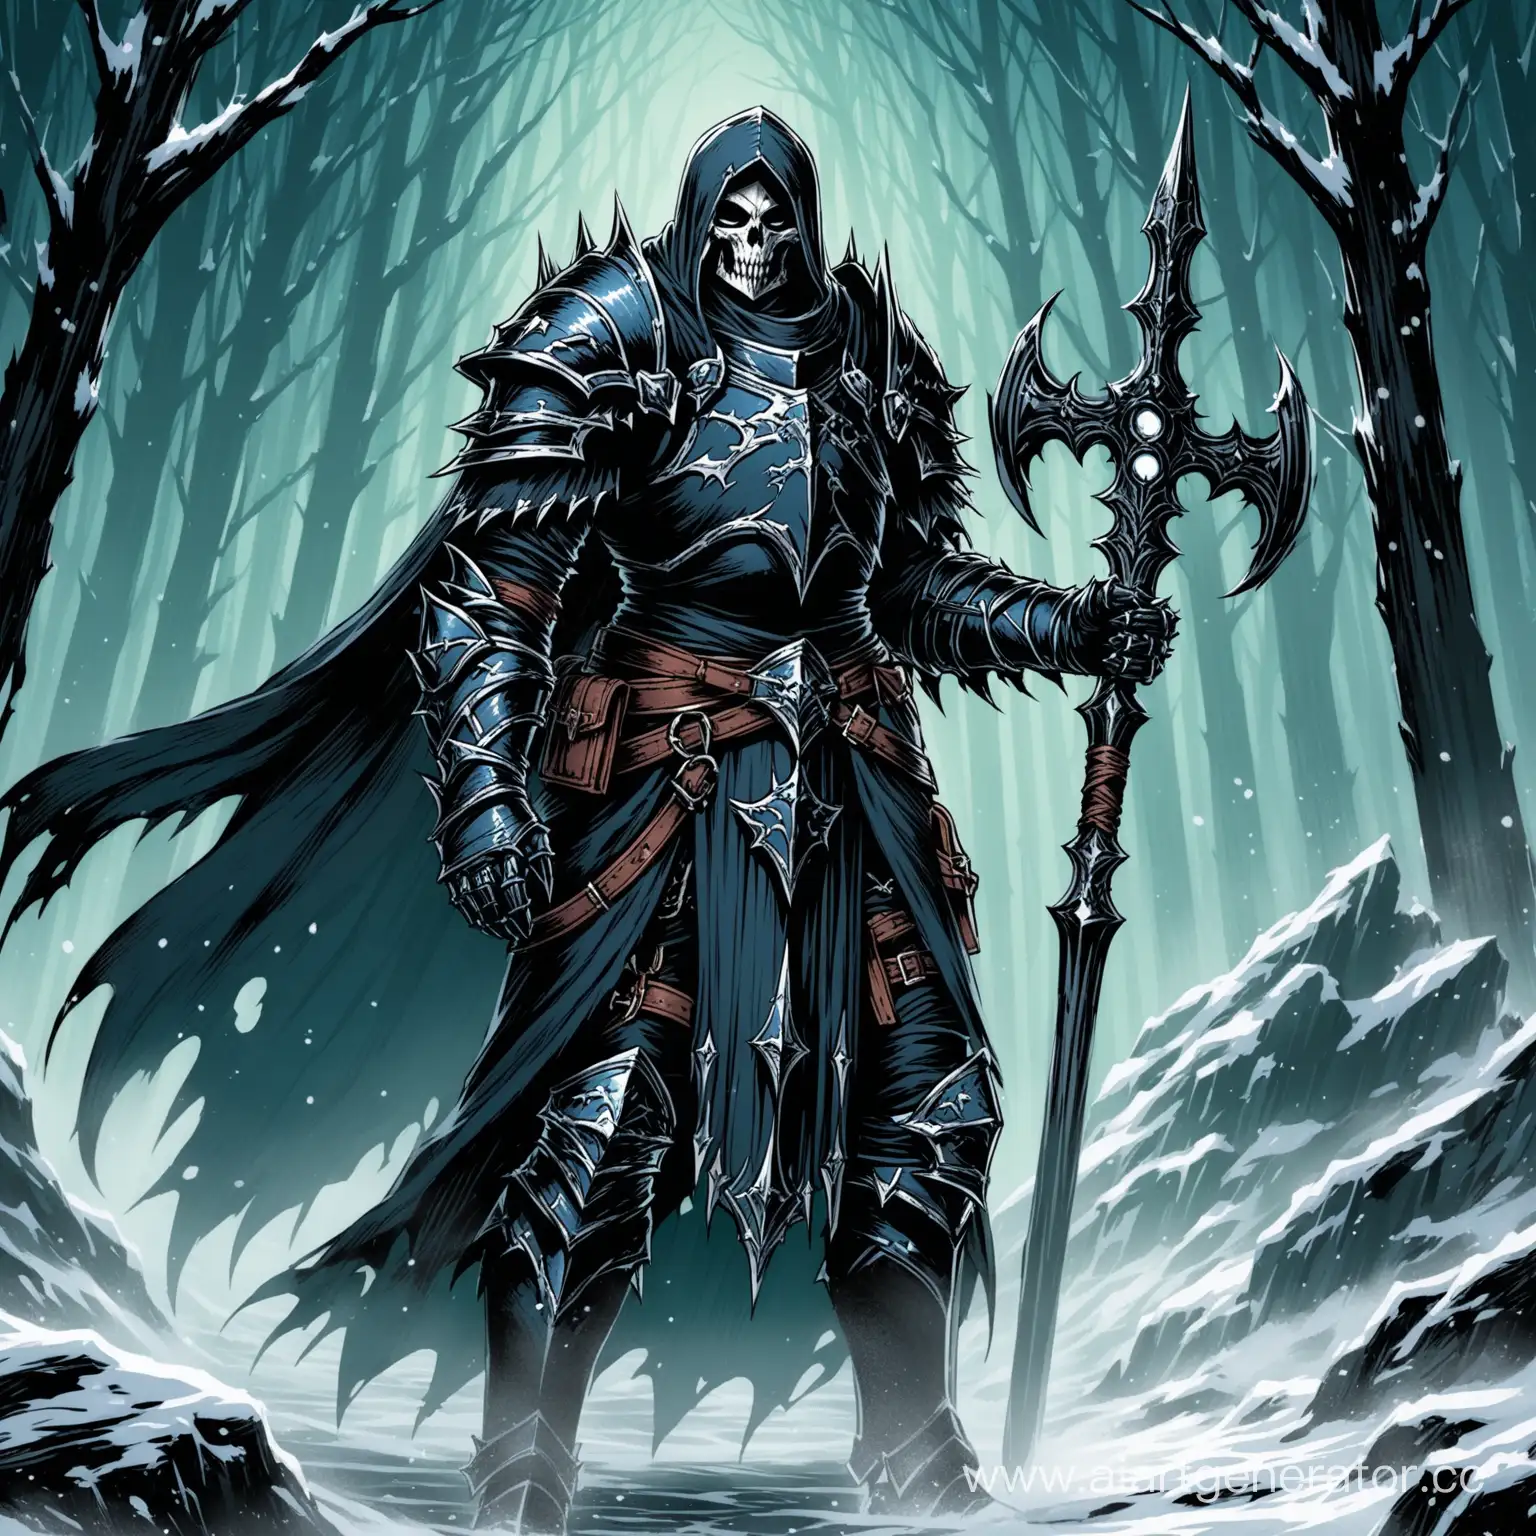 Brooding-Death-Knight-in-Dungeons-and-Dragons-Setting